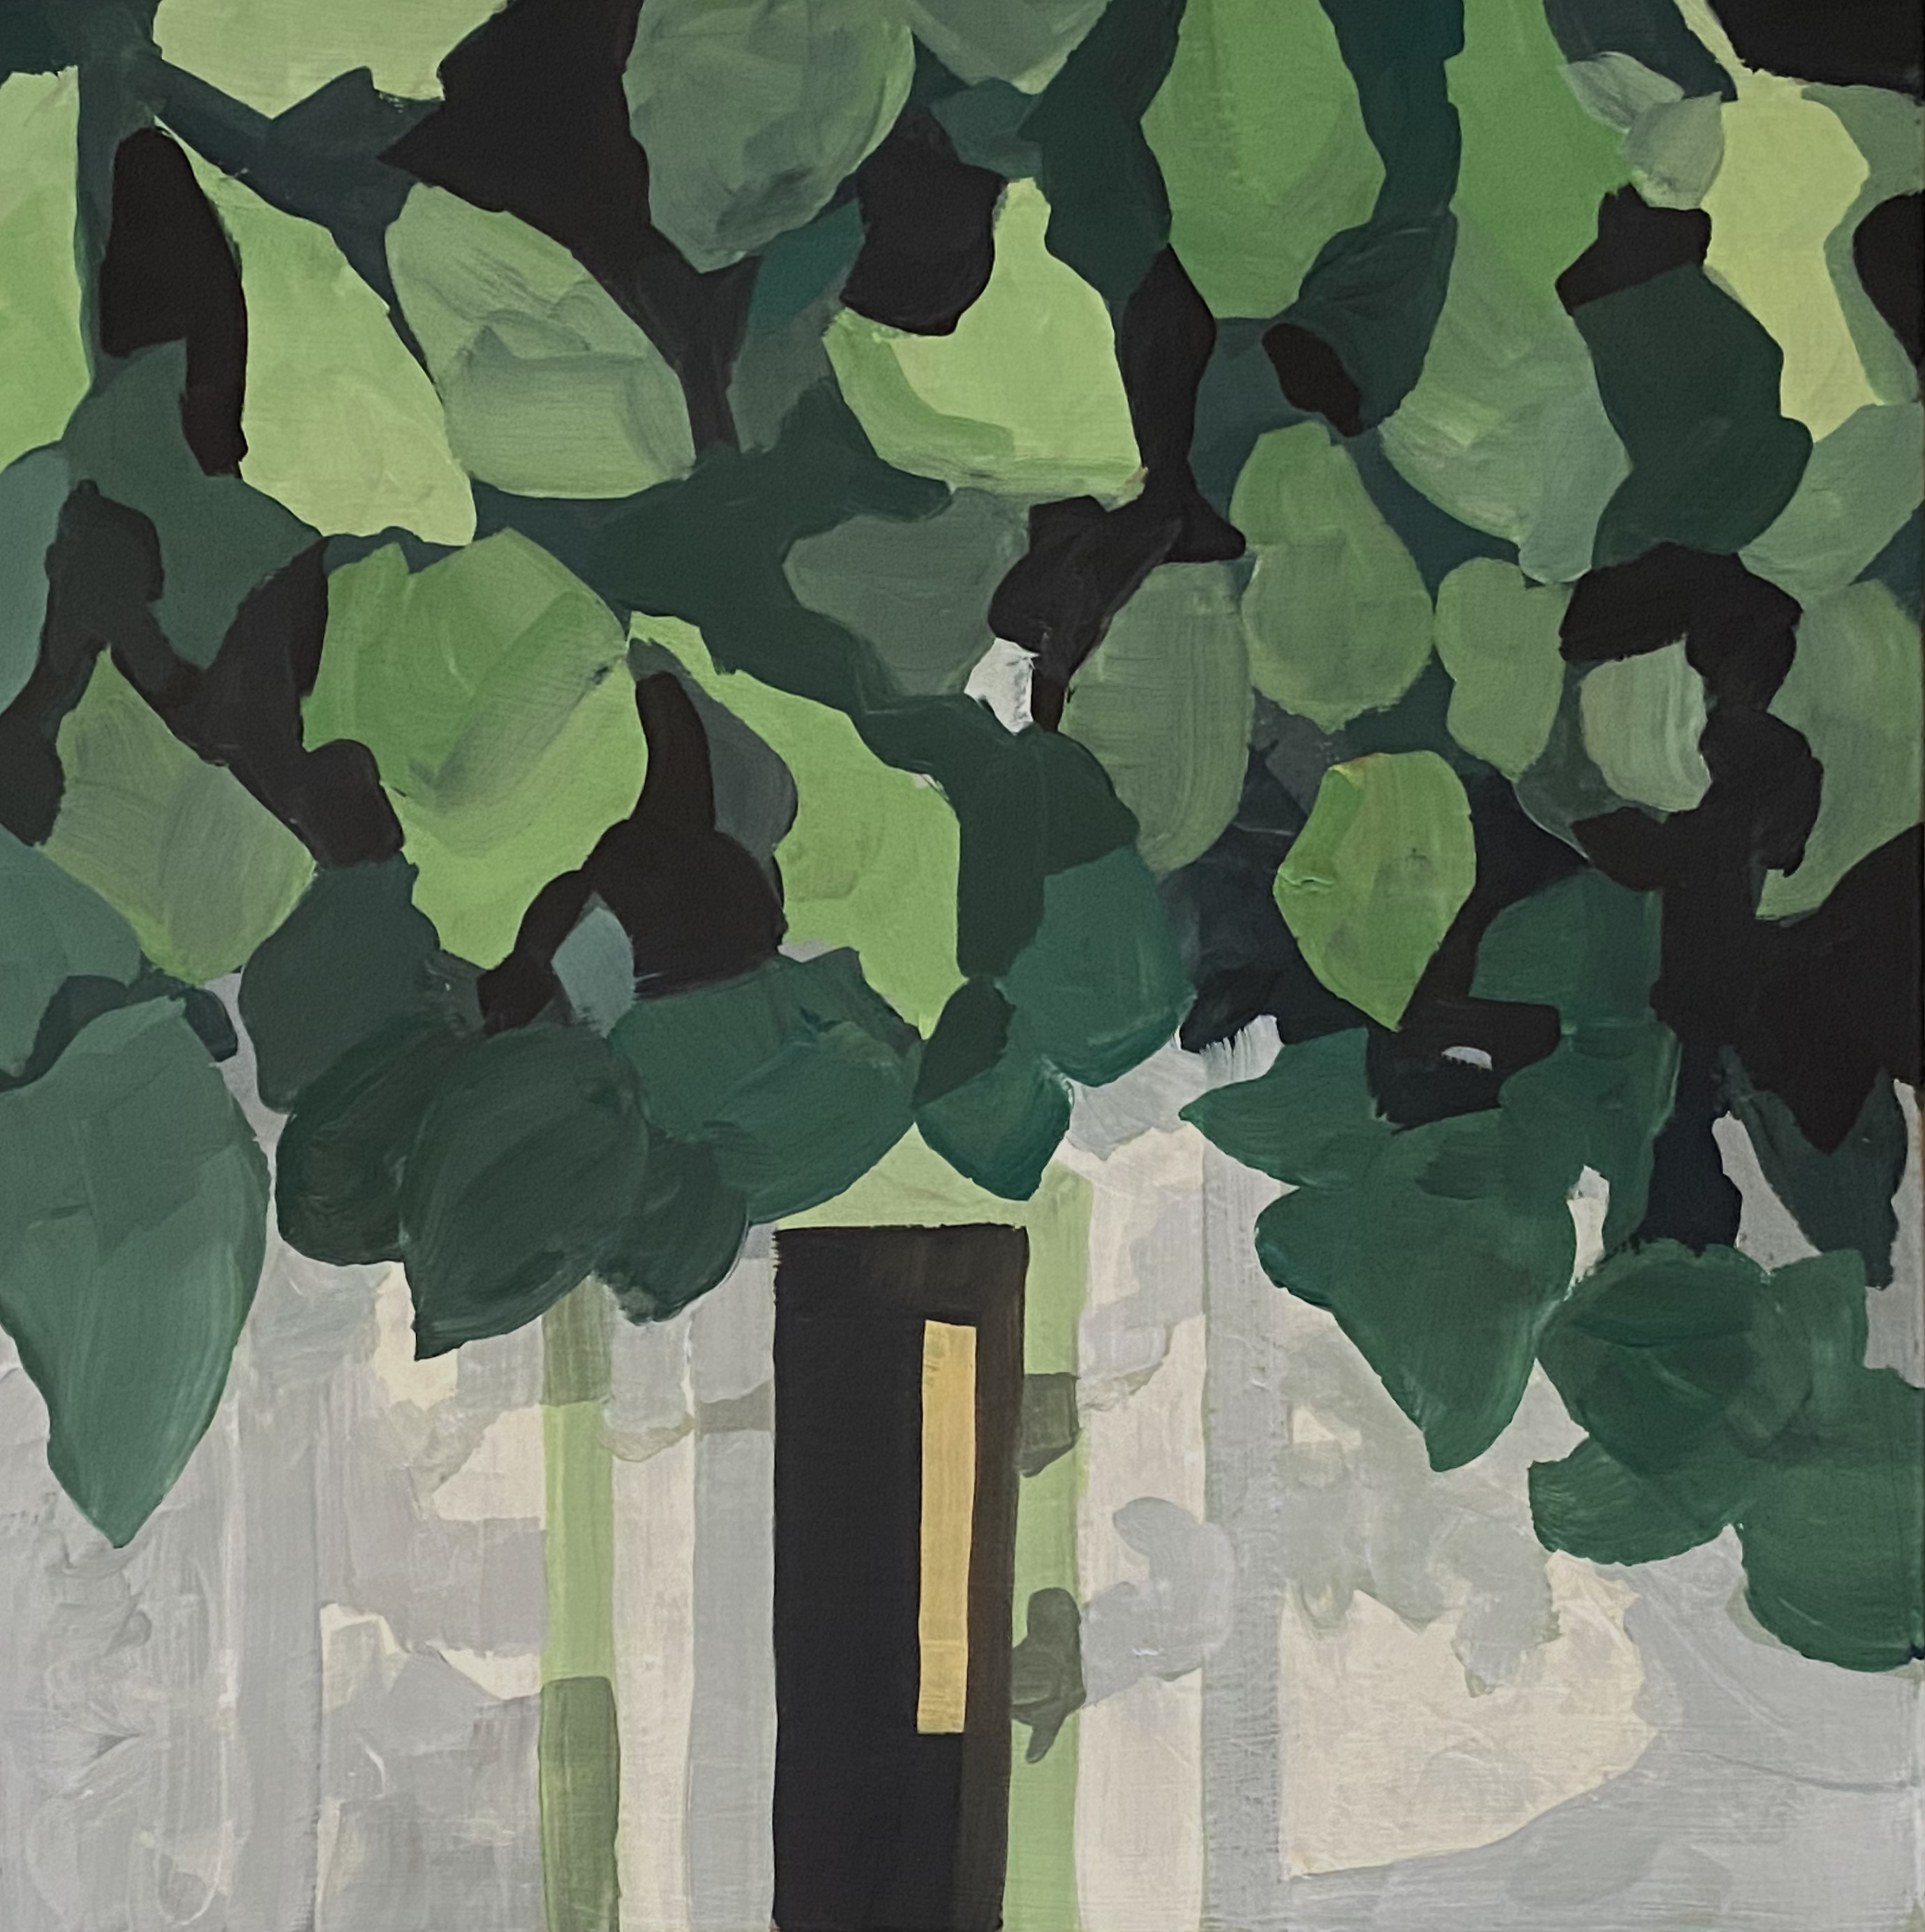 The door and the tree